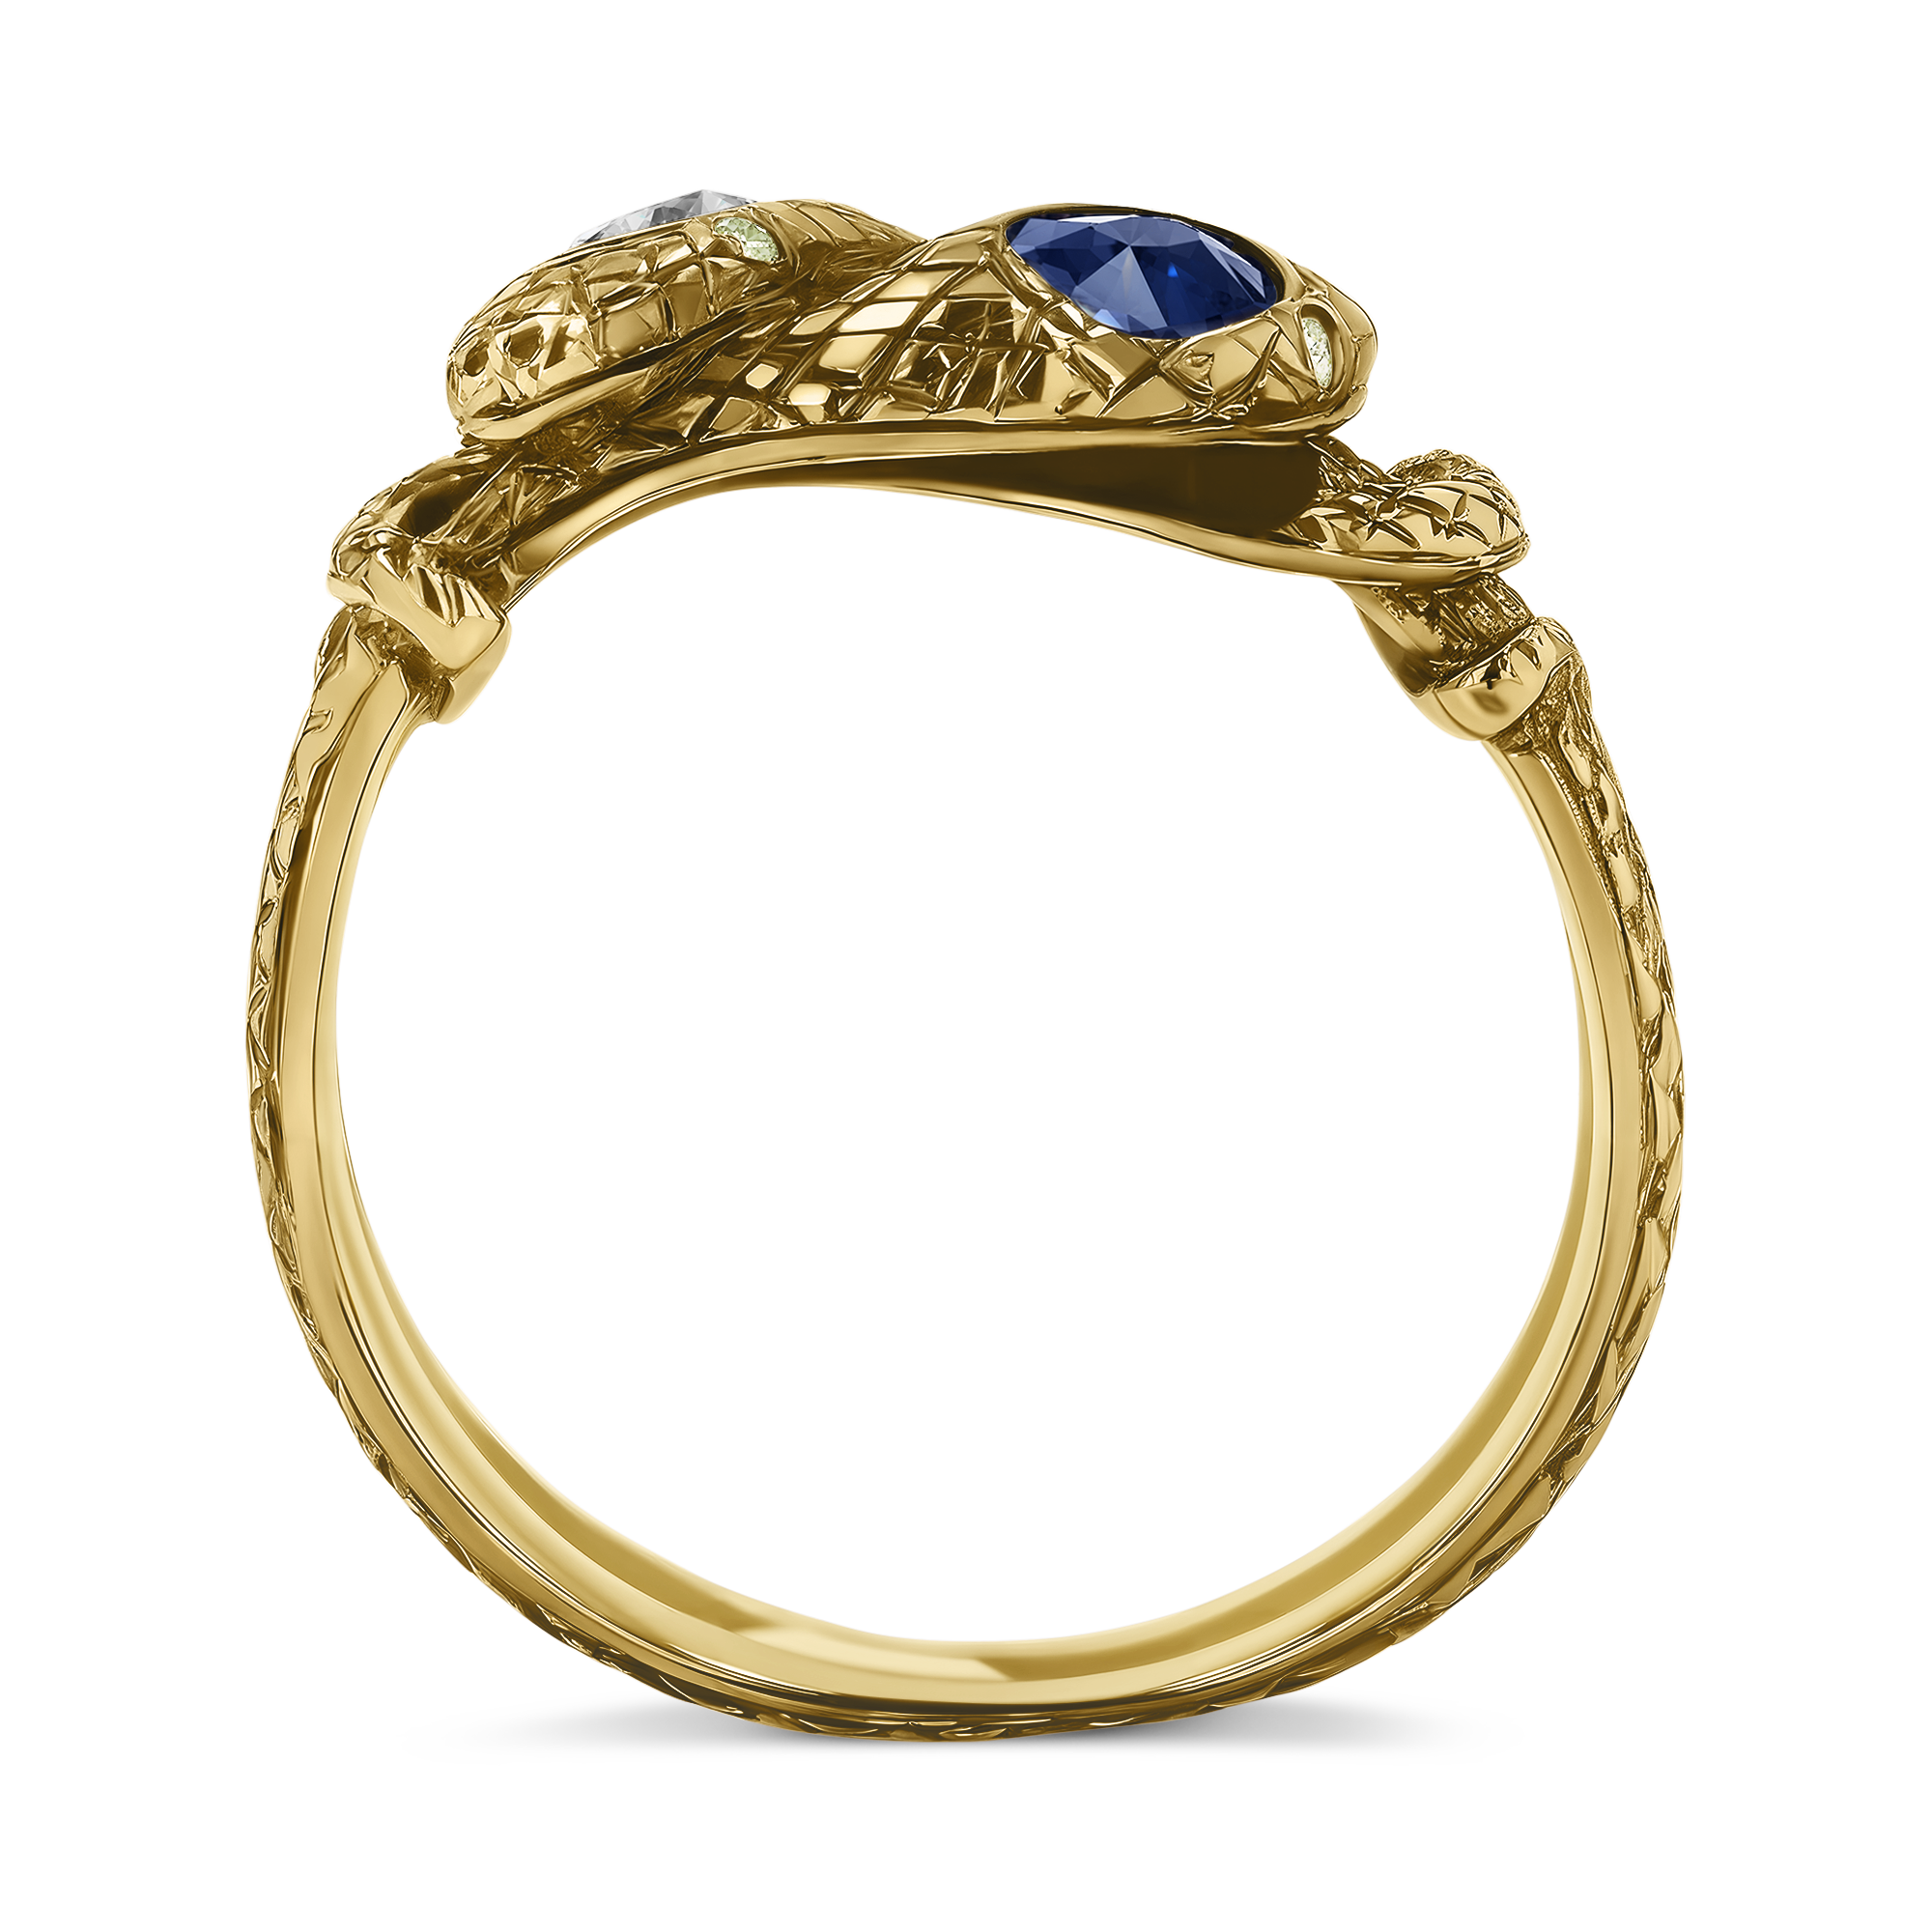 Belle Epoque Sapphire and Diamond Entwined Snake Ring Old Mine Cut, Rubover Set_3